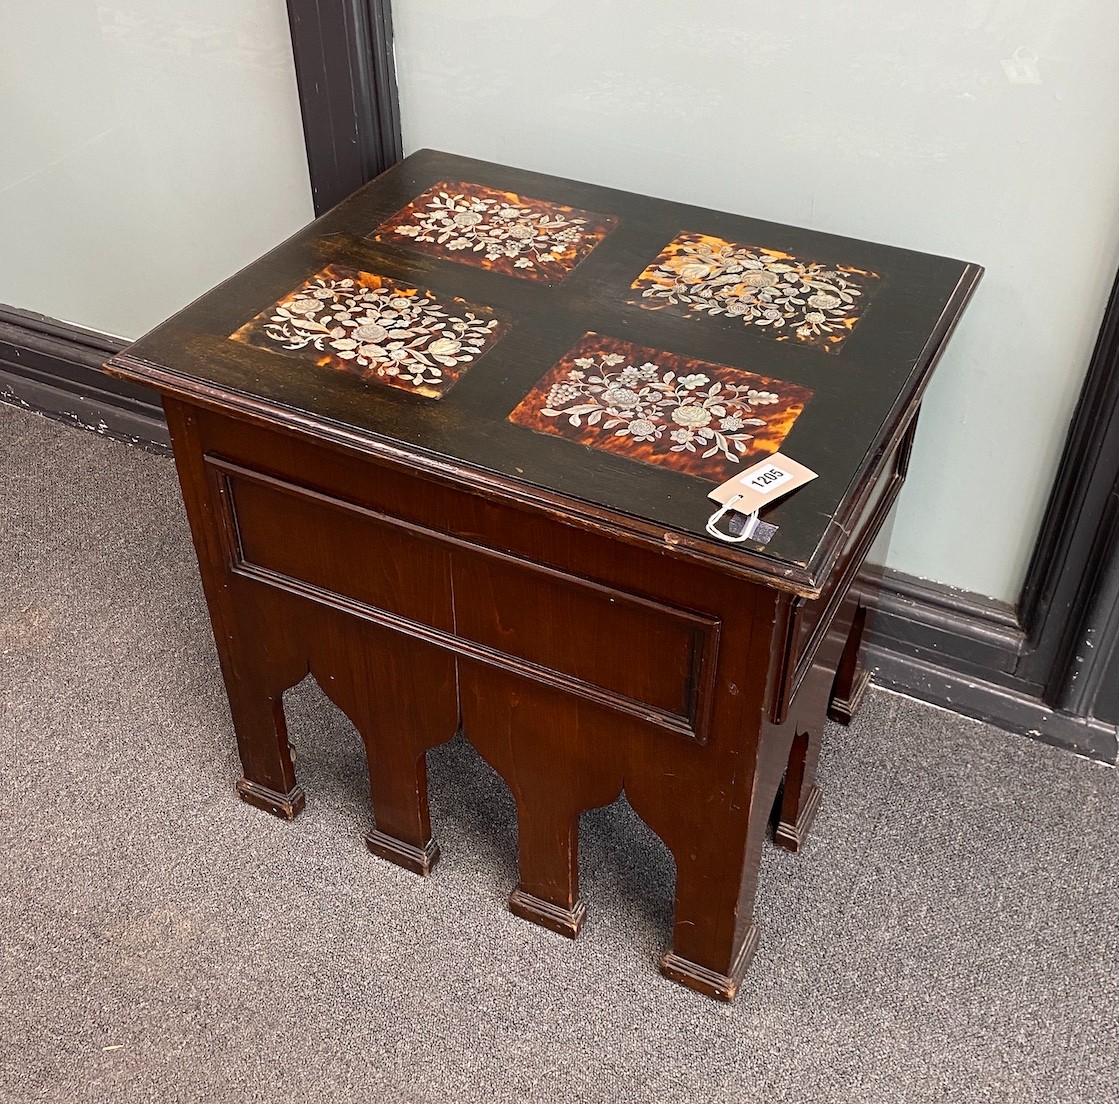 An early 20th century Liberty style rectangular mahogany occasional table the top inset four mother of pearl inlaid tortoiseshell panels, width 55cm, depth 45cm, height 50cm